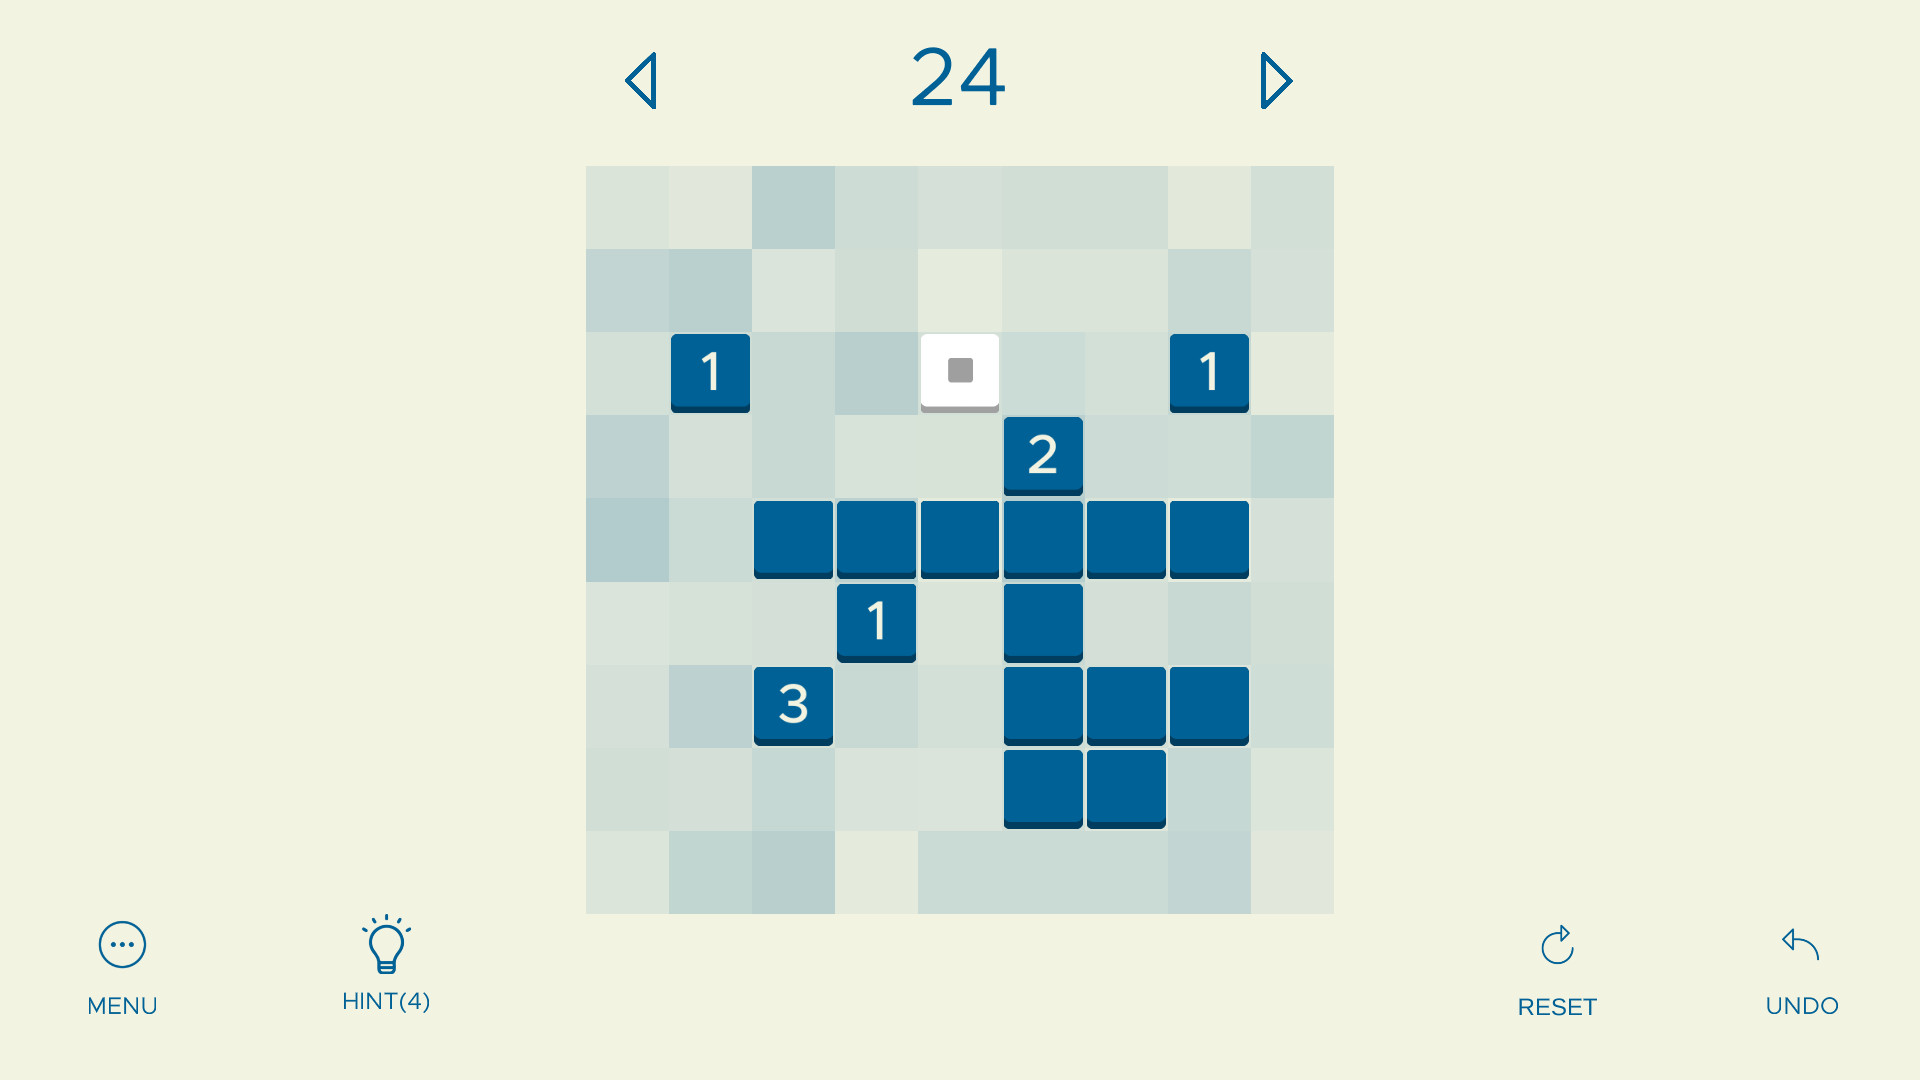 ZHED - Puzzle Game no Steam